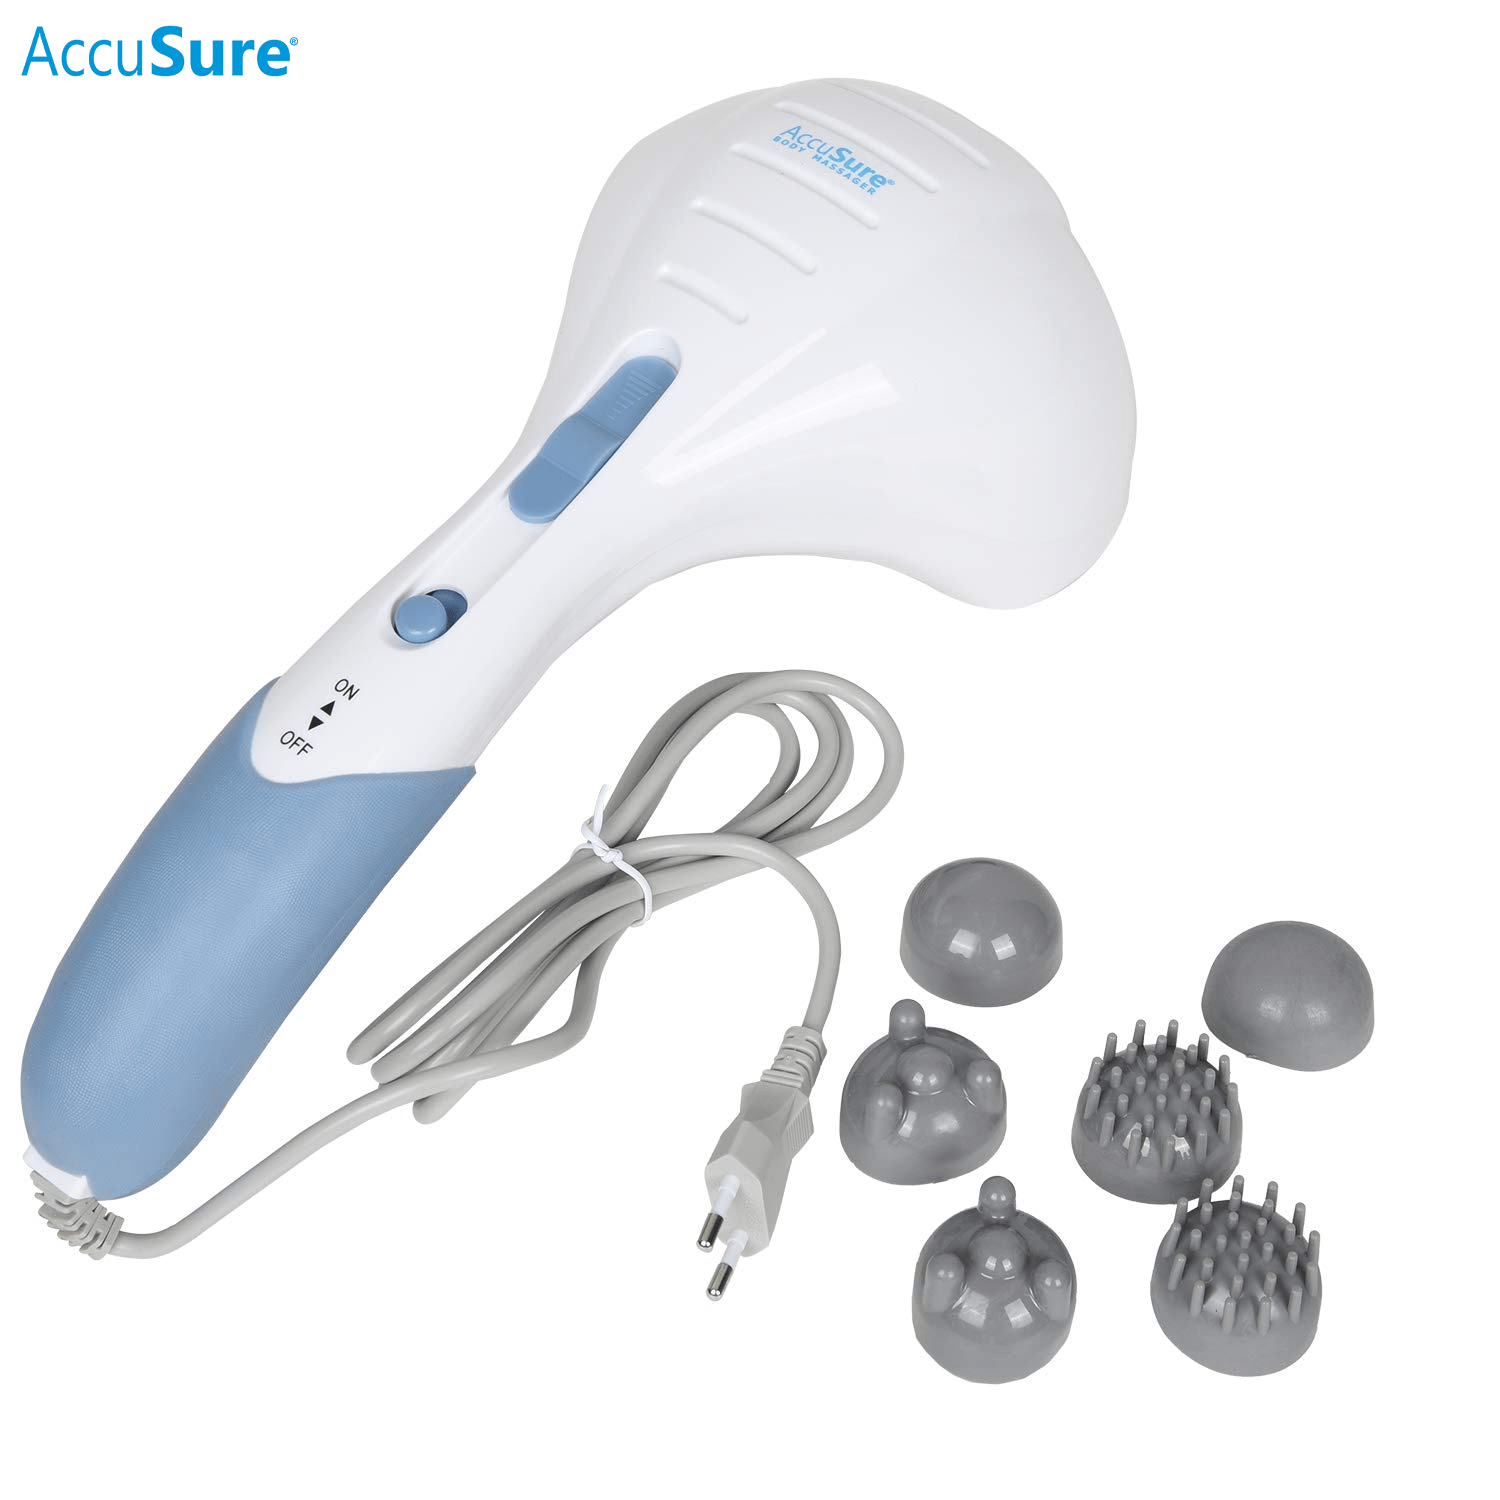 Accusure Dual Head Body Massager Hammer